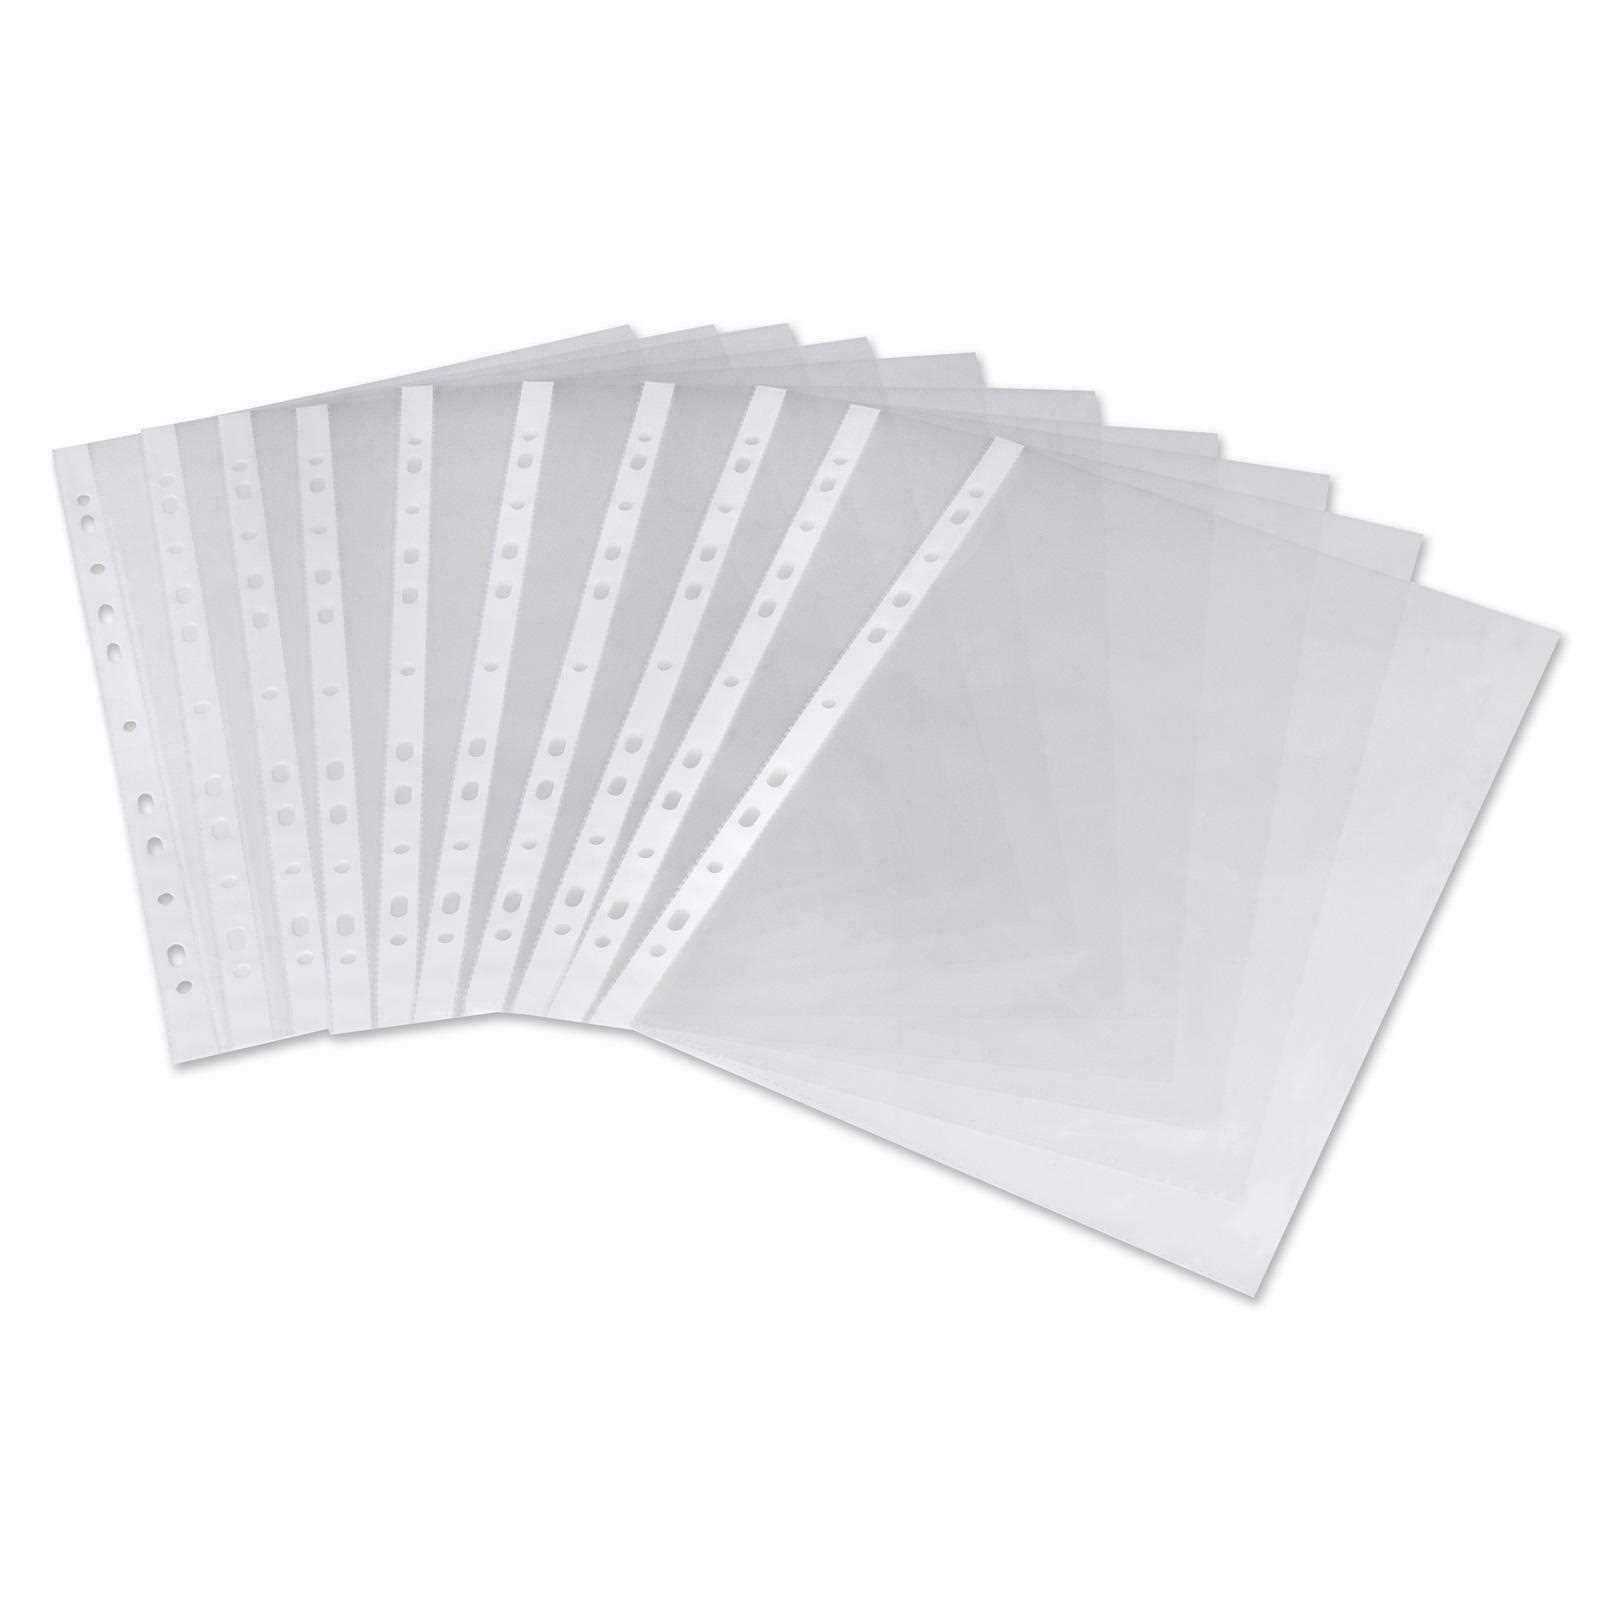 50 X A4 Plastic Punch Punched Pockets 20 Micron Folders Filing Wallets Sleeves